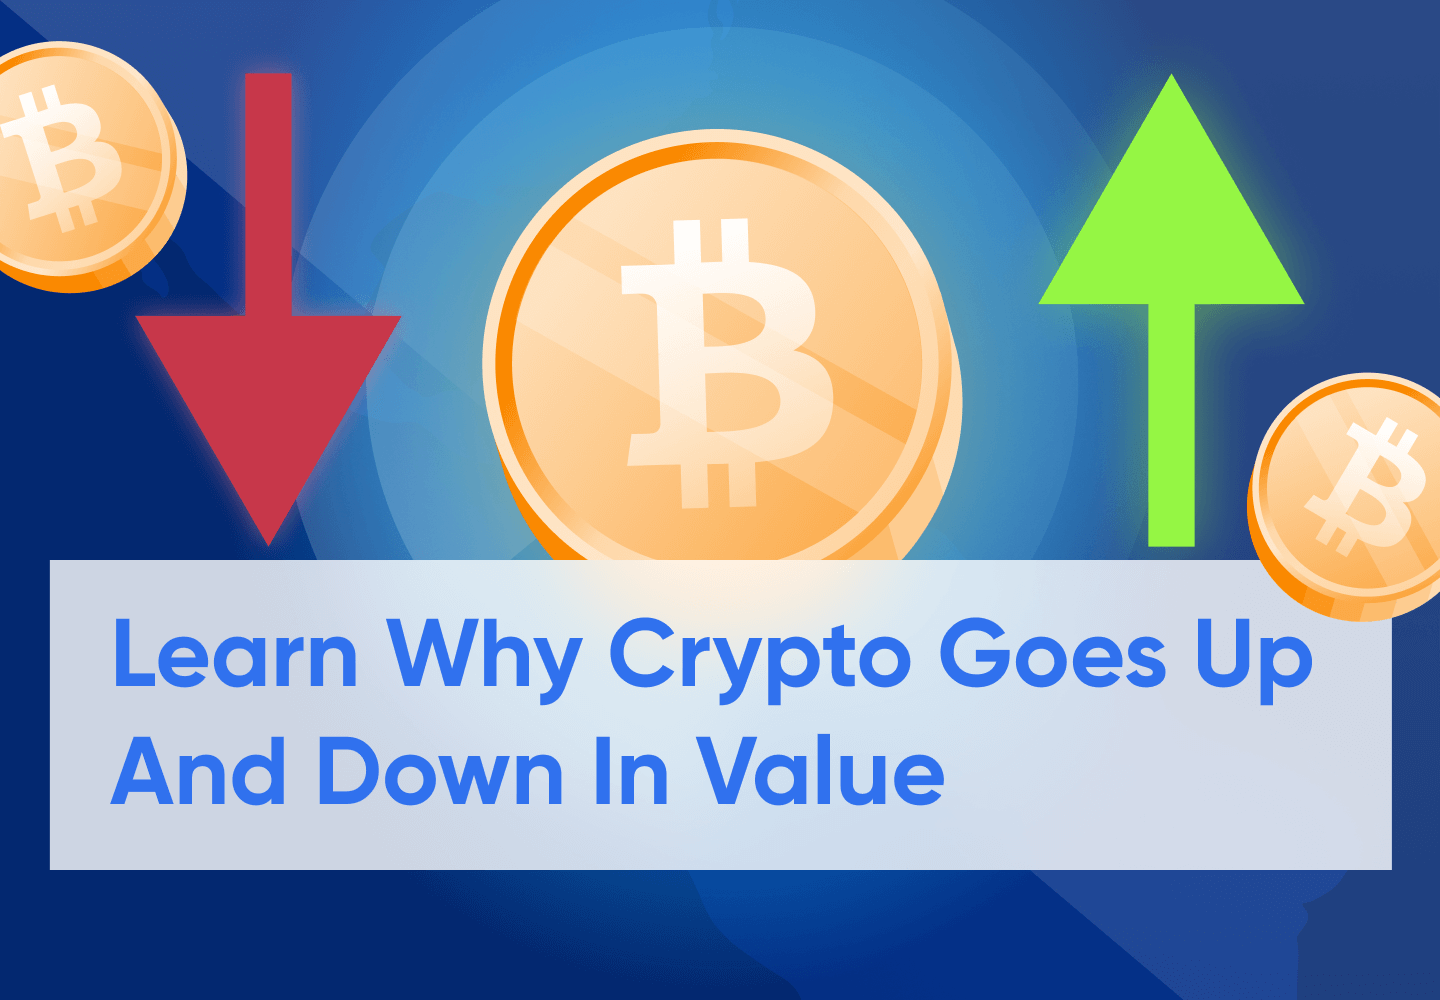 What Makes Crypto Go Up And Down?